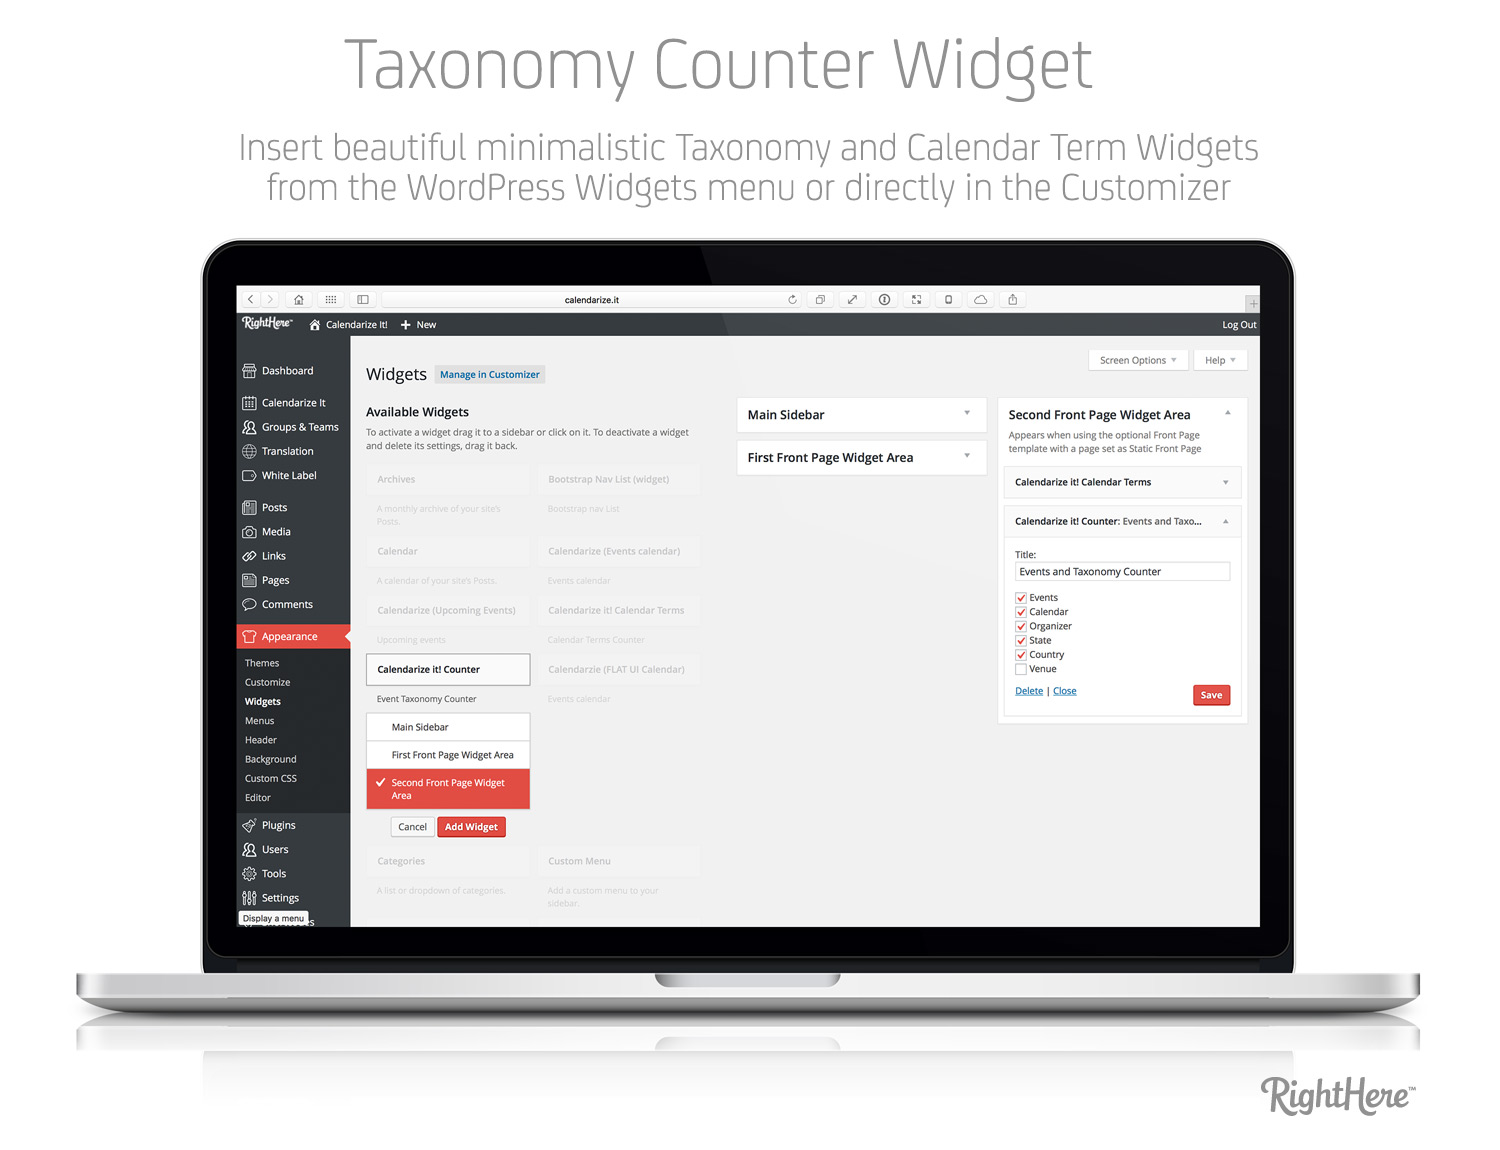 Taxonomy Counter Widget add-on for Calendarize it!